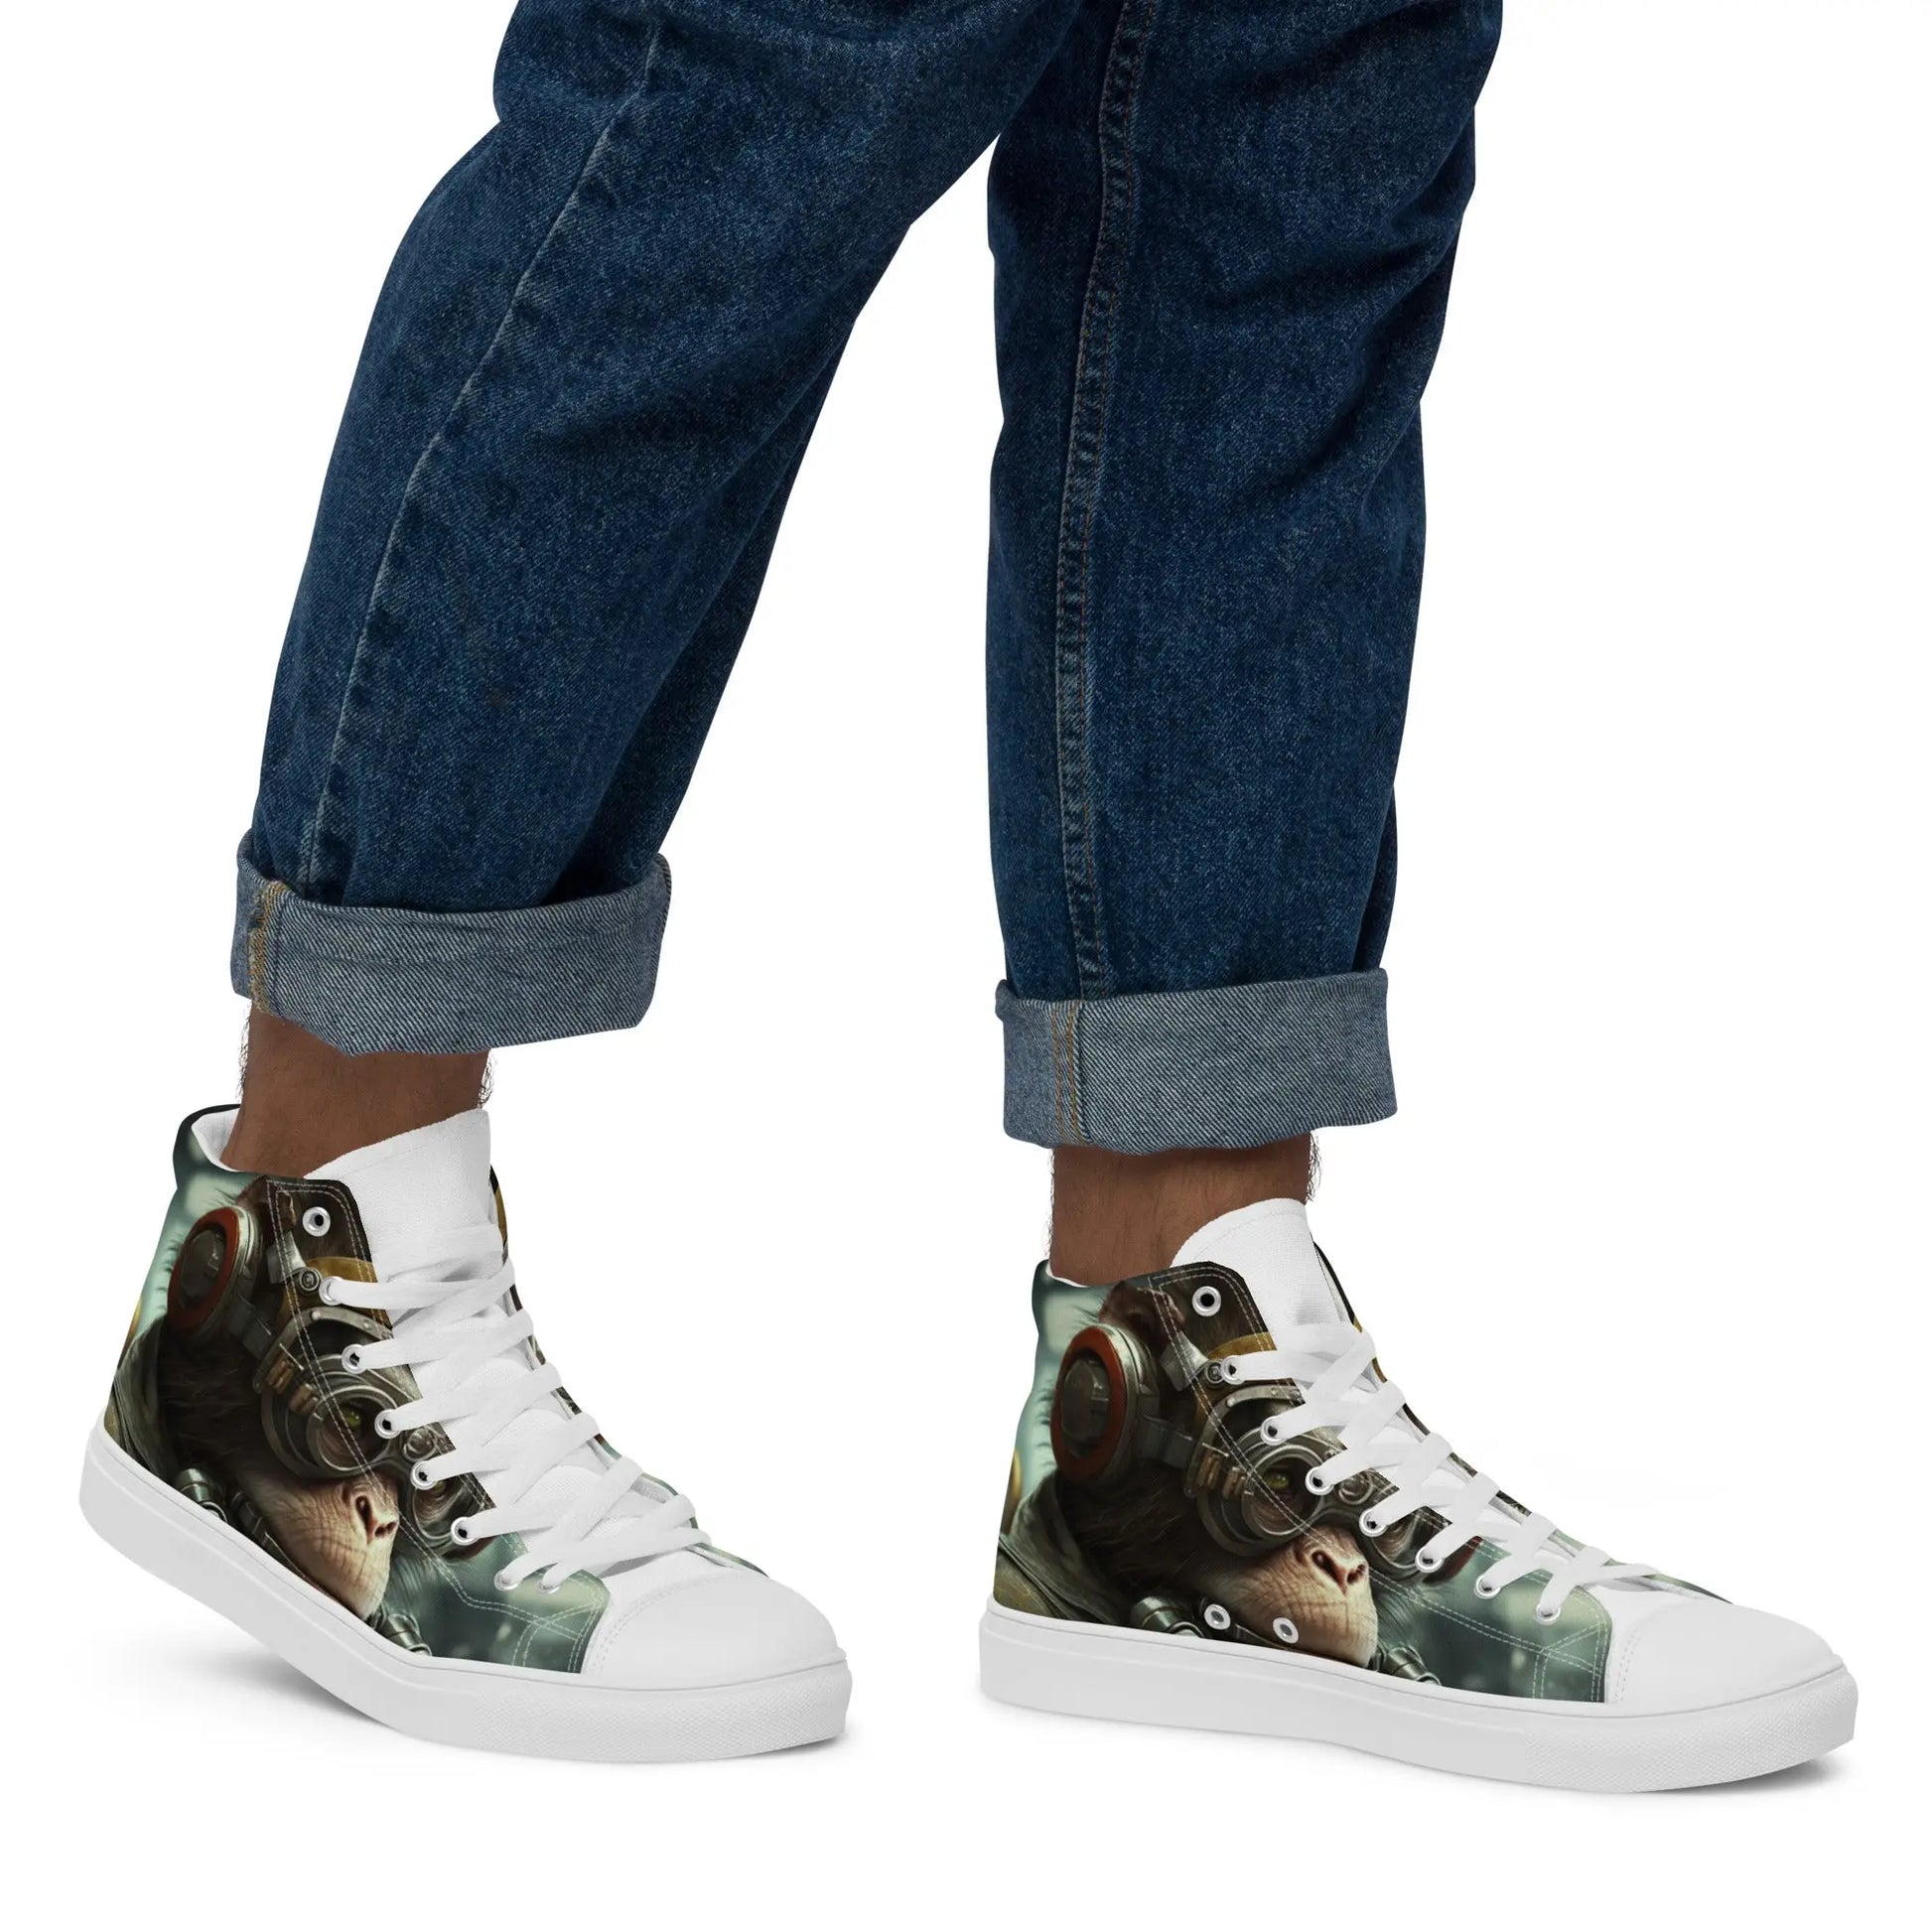 CyberEdge Monkey High Top Sneakers: AI-Engineered, Unisex, Perfect Blend of Edgy and Cool, Durable, Comfortable, Futuristic-Inspired Design Kinetic Footwear